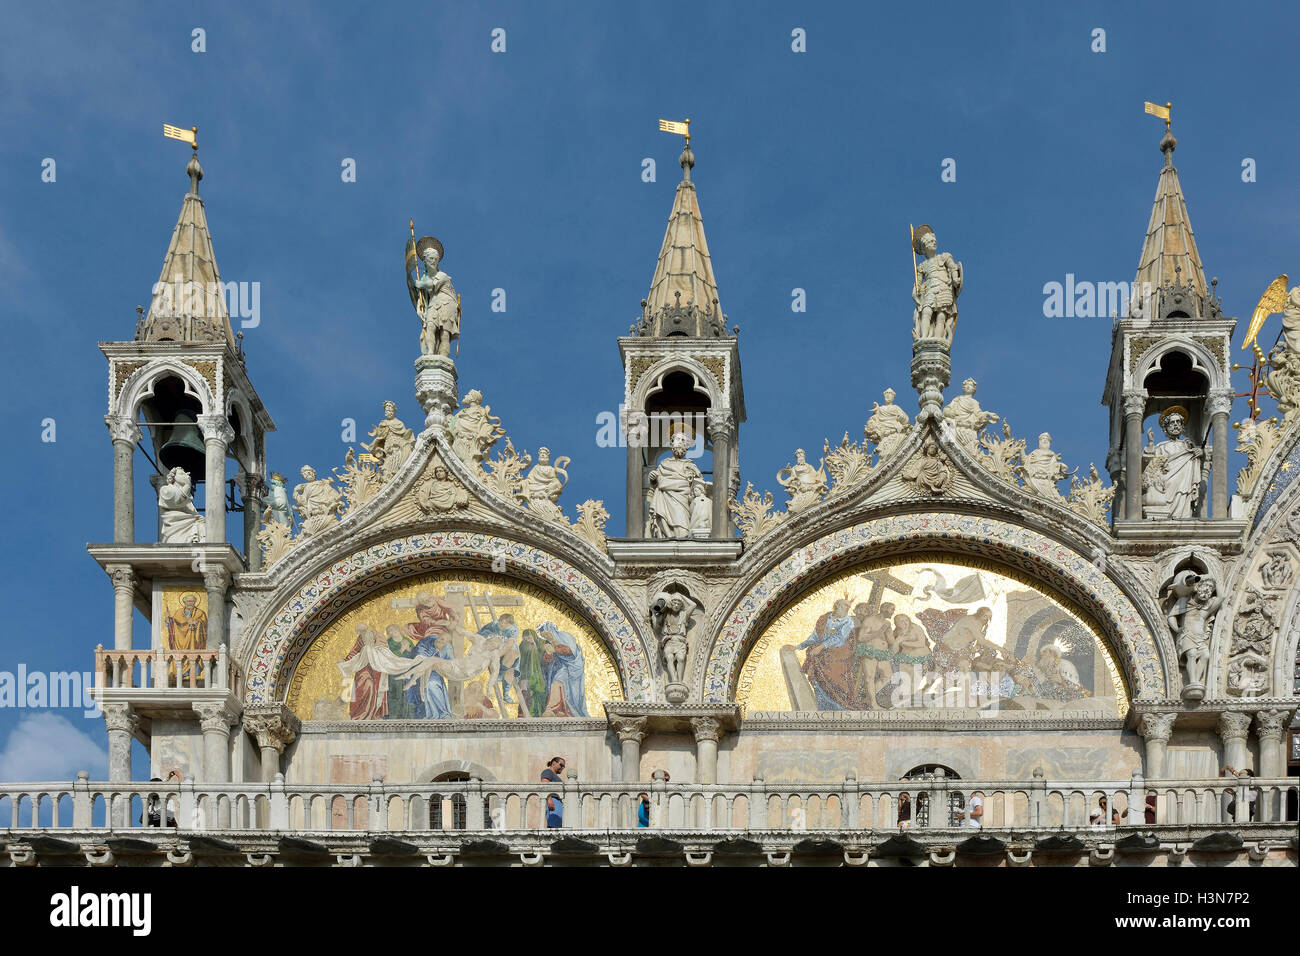 Detail of facade of St. Mark's Basilica of Venice in Italy. Stock Photo